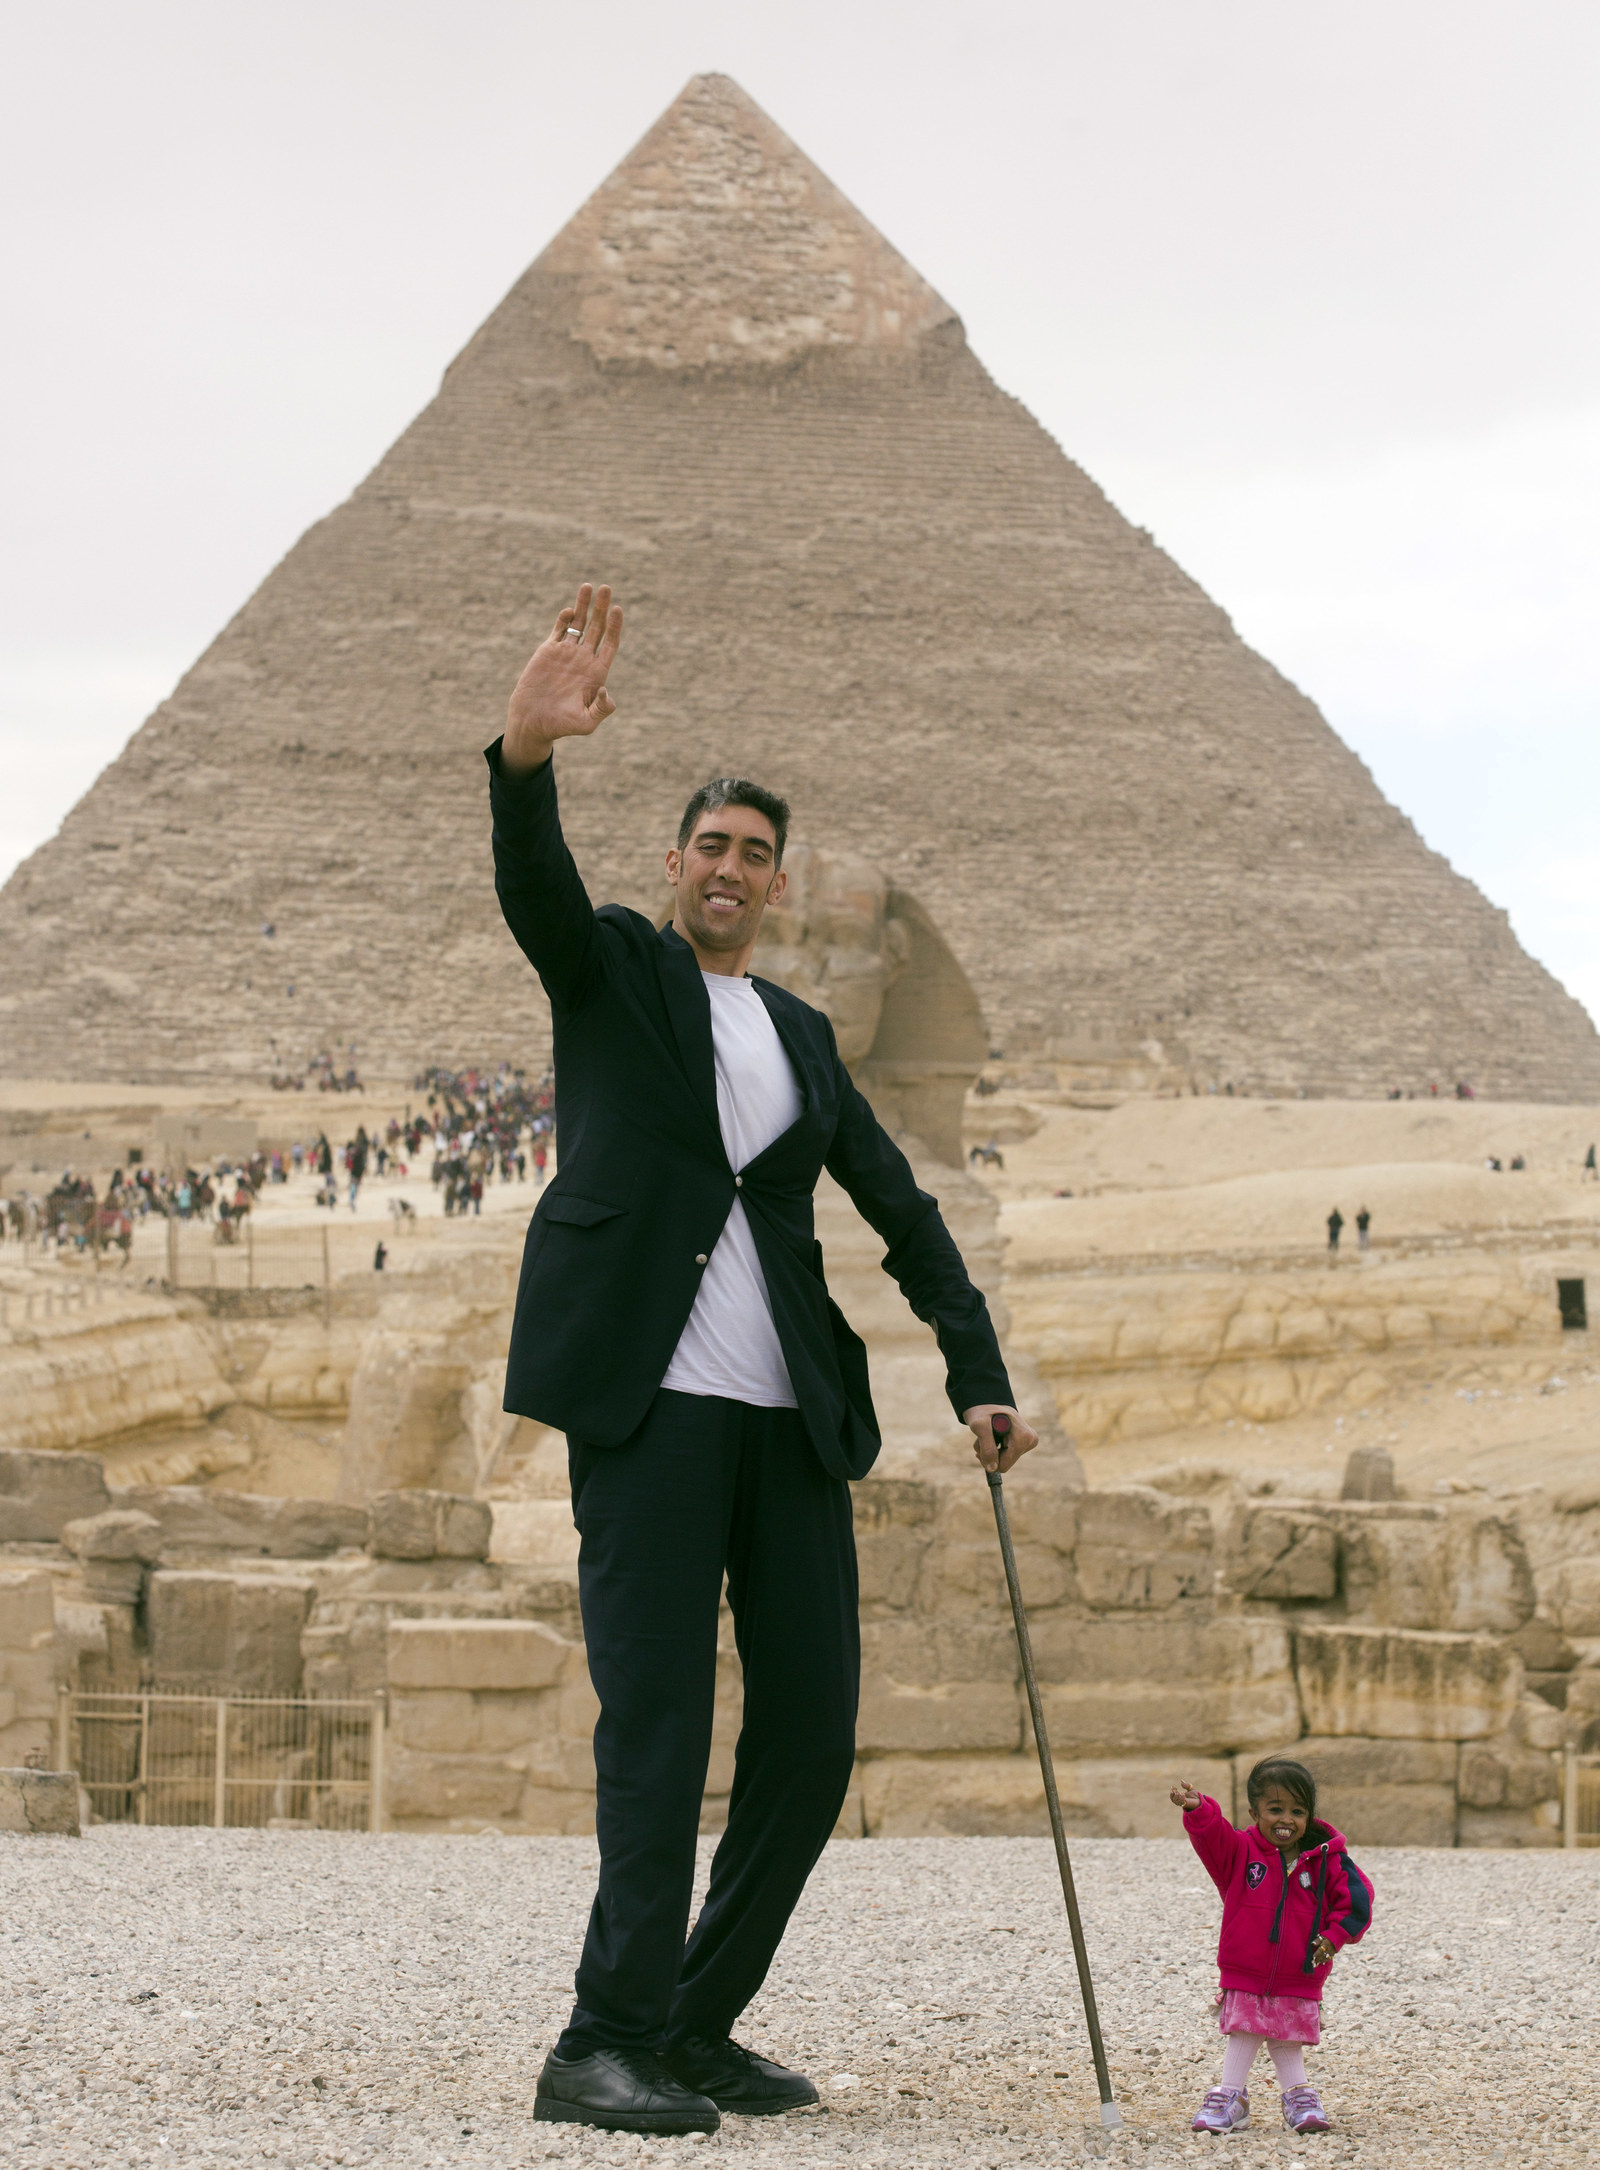 The World's Tallest Man And Shortest Woman Hung Out At The Pyramids And The  Pictures Are Pretty Amazing